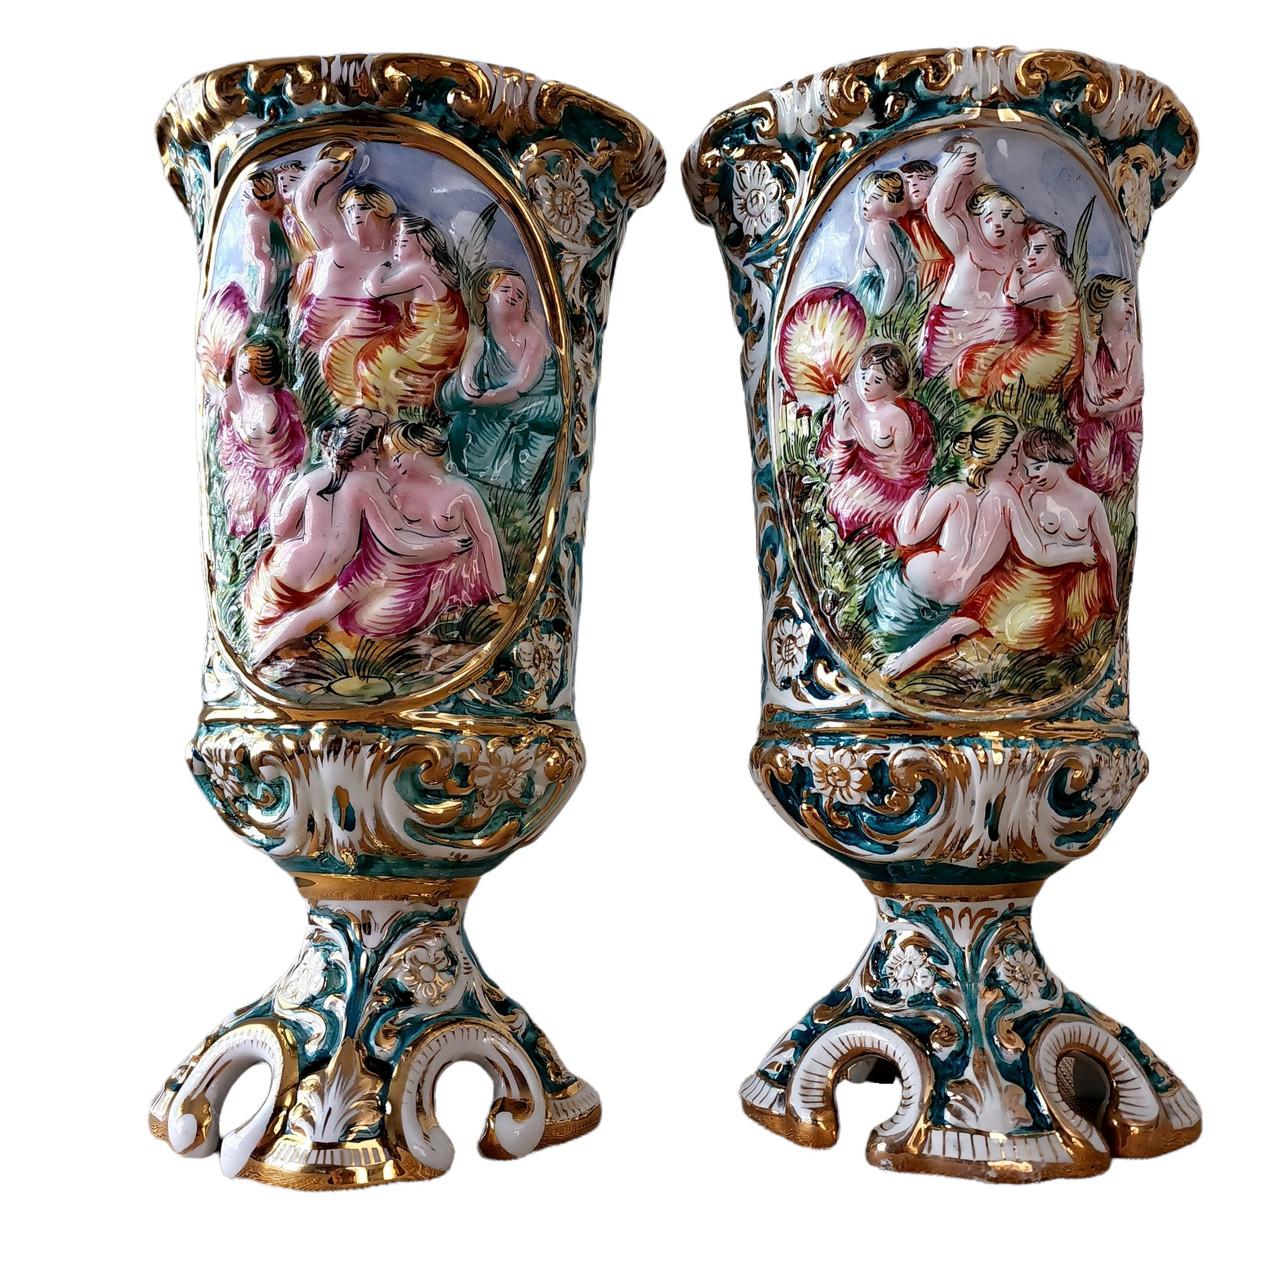 Late 19th Century Capodimonte Porcelain Pedestal Base Vase-A Pair

Marks: 411 Capodimonte Italy
Pattern: Floral Figural
Material: Ceramic
Type or Style: Vase
Crafted In: Italy
Circa: Late 19th Century
Item Height: 14 1/4 in
Item Width: 7 3/4